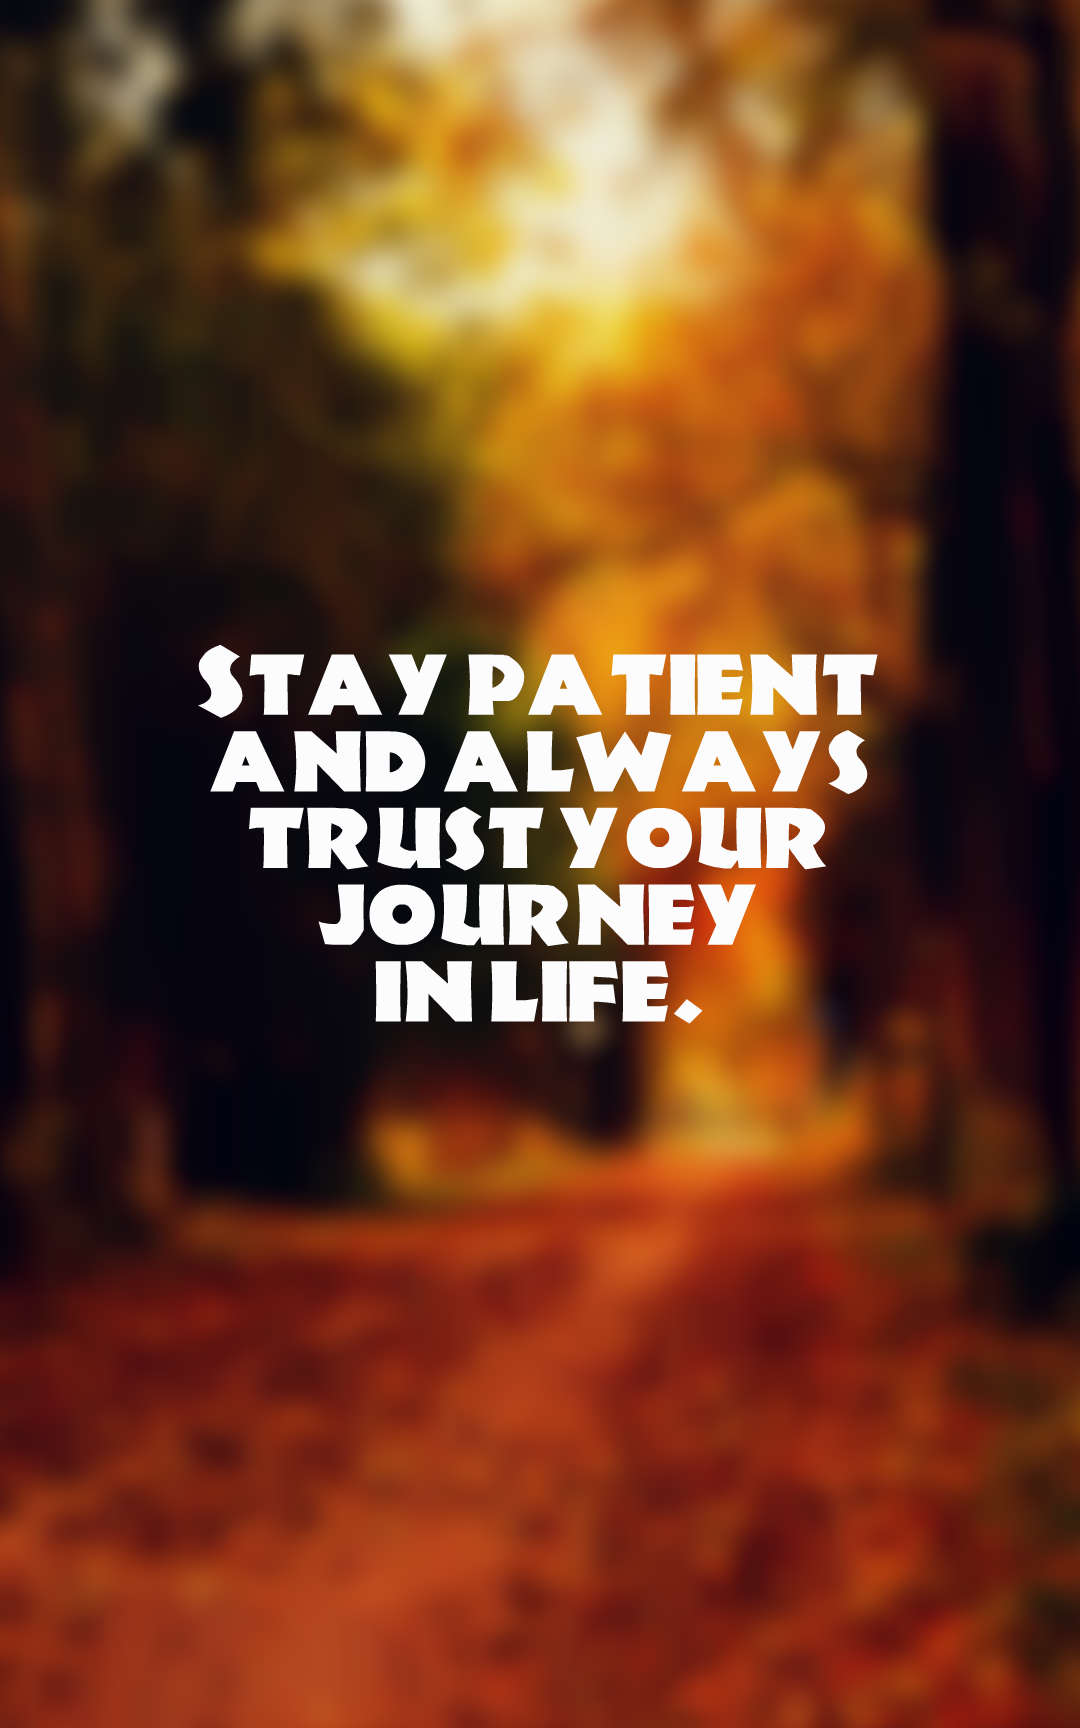 Stay patient and always trust your journey in life.